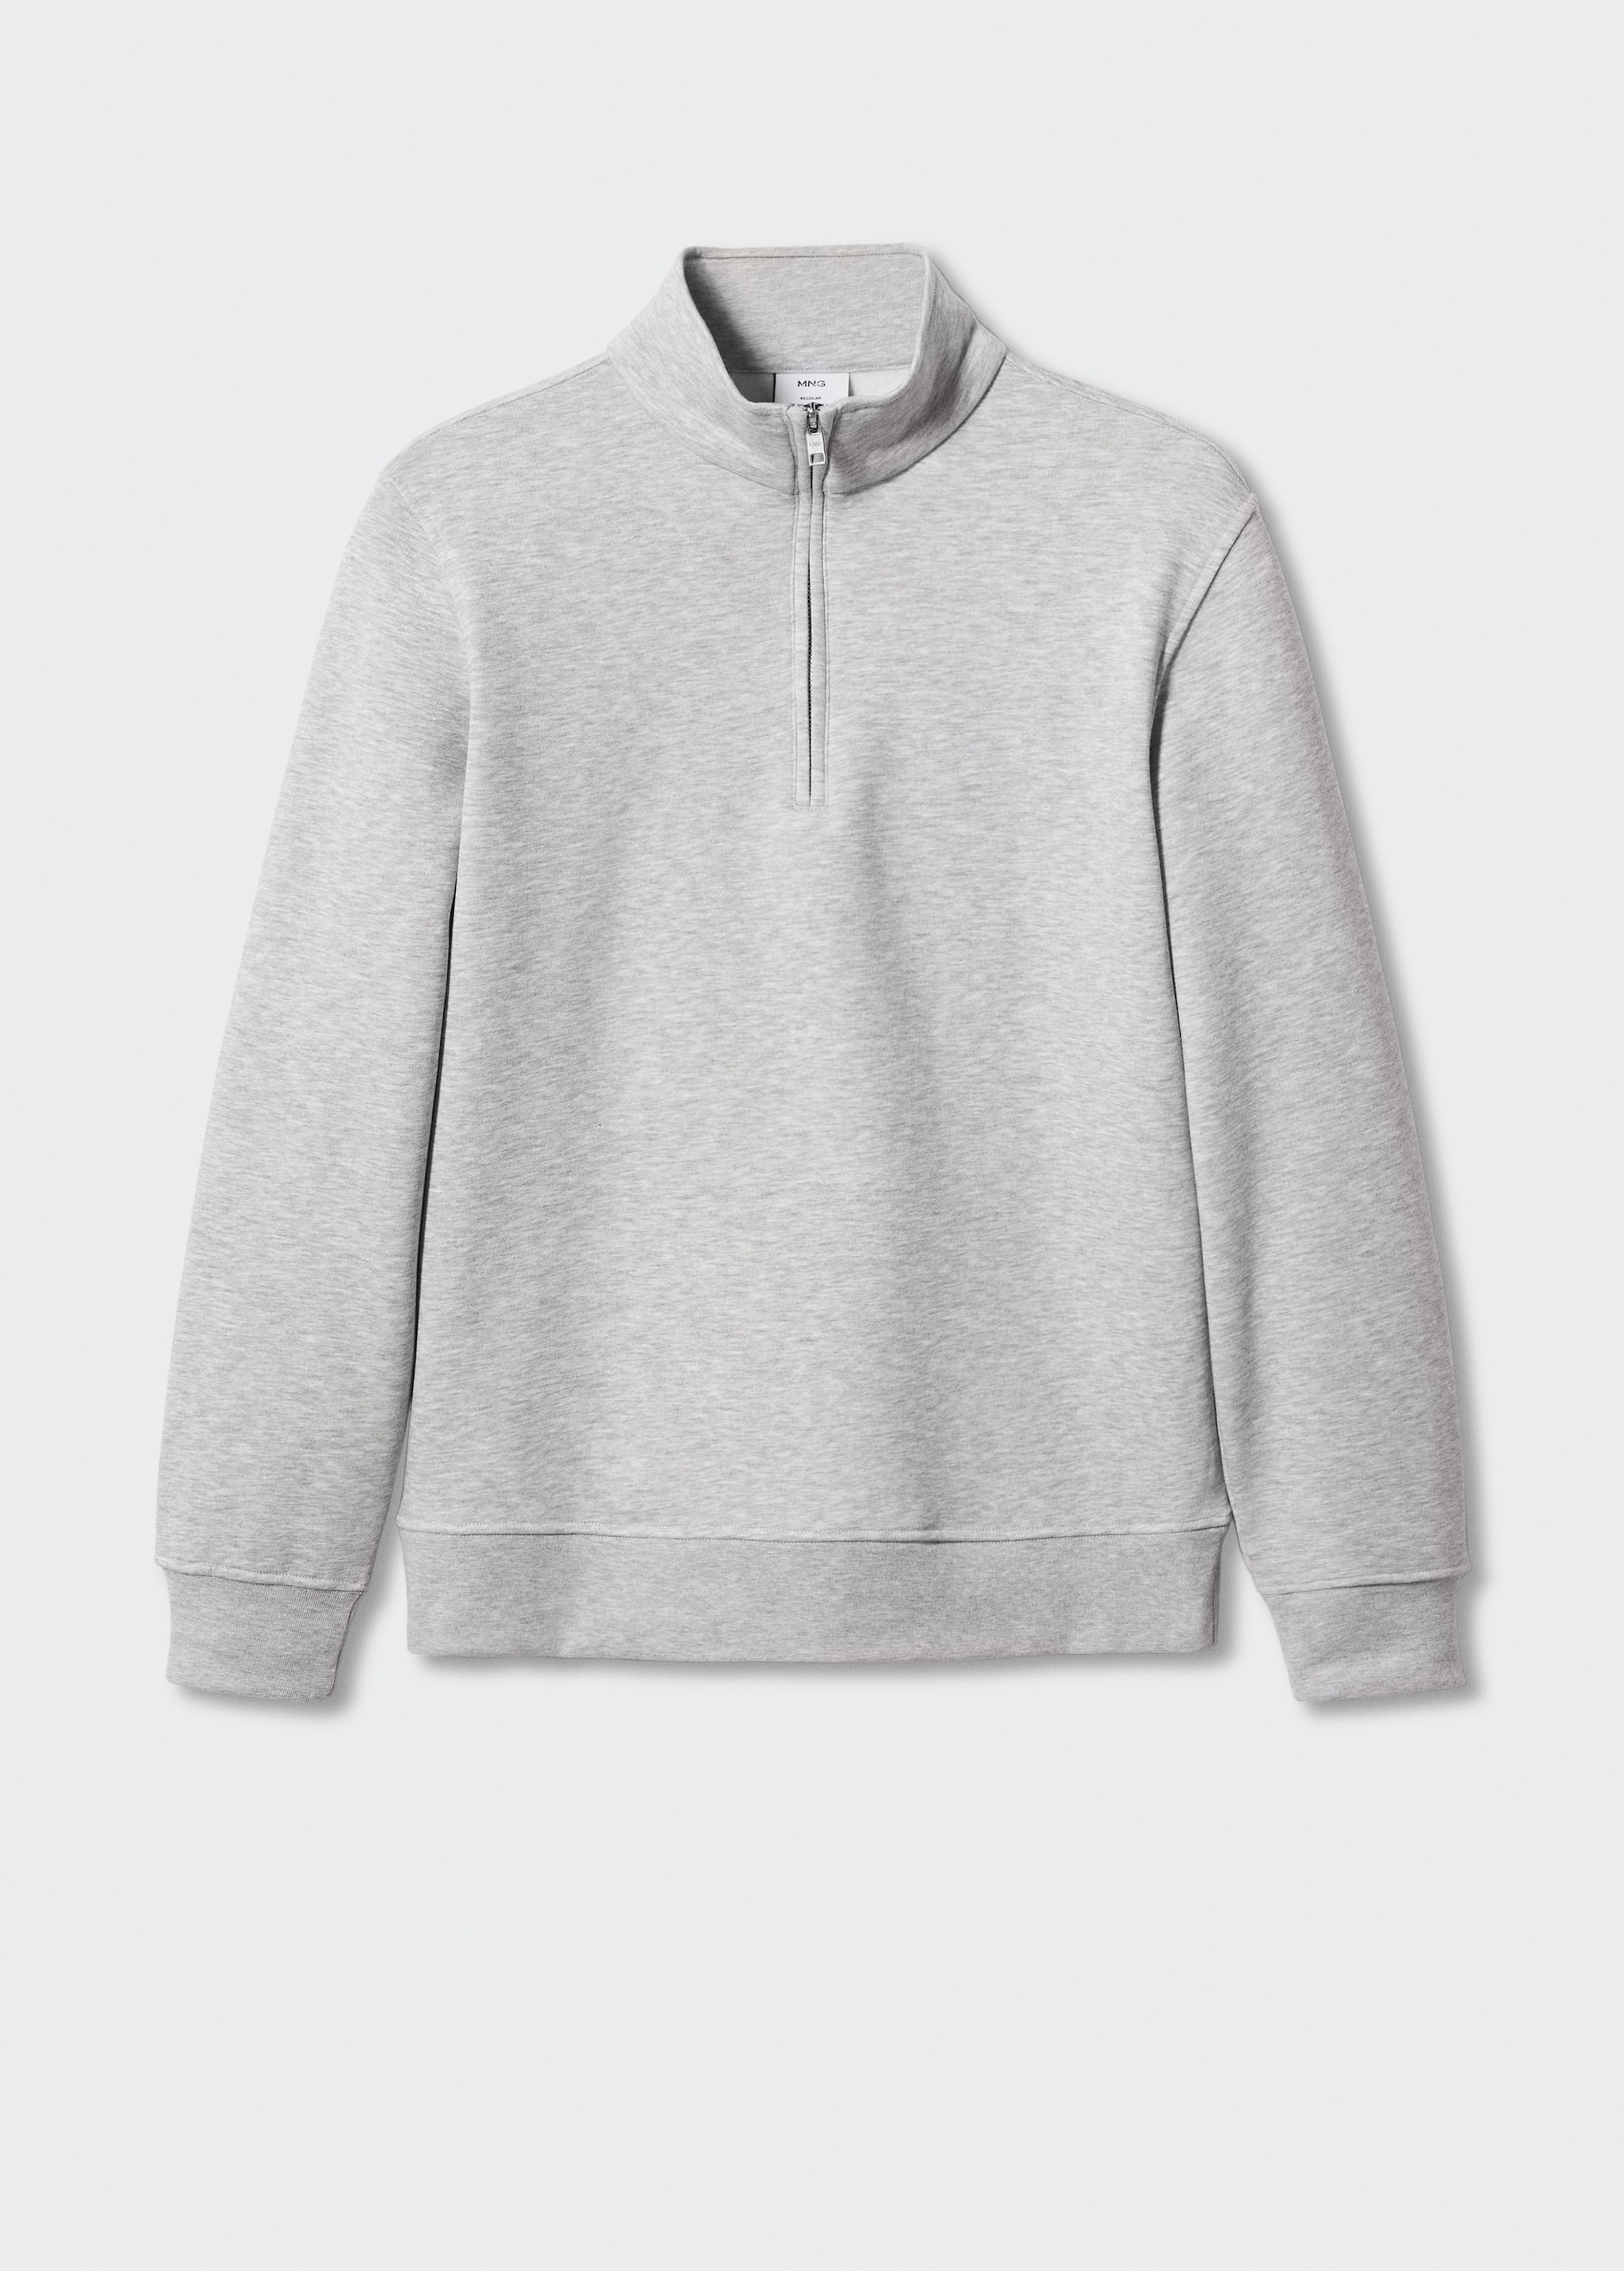 Cotton sweatshirt with zip neck - Article without model